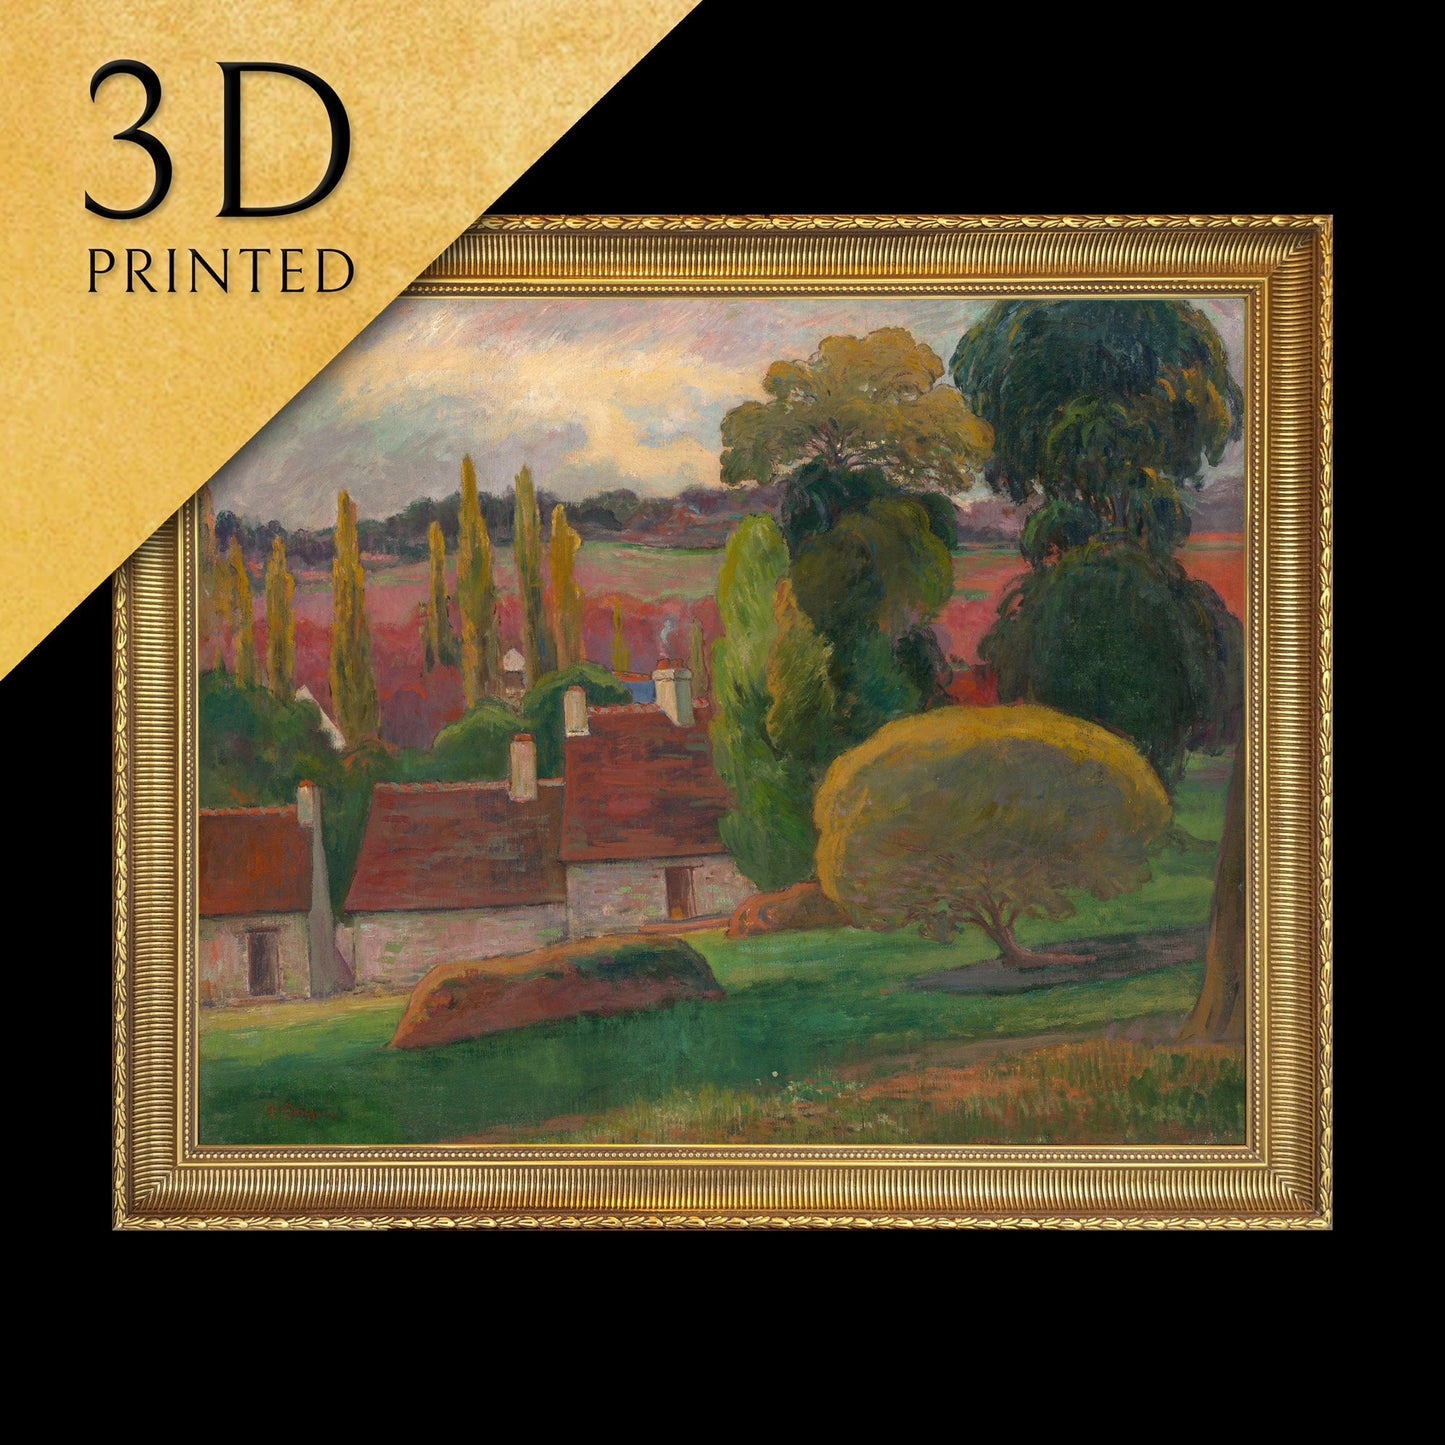 A Farm in Brittany - by Paul Gauguin, 3d Printed with texture and brush strokes looks like original oil-painting, code:807